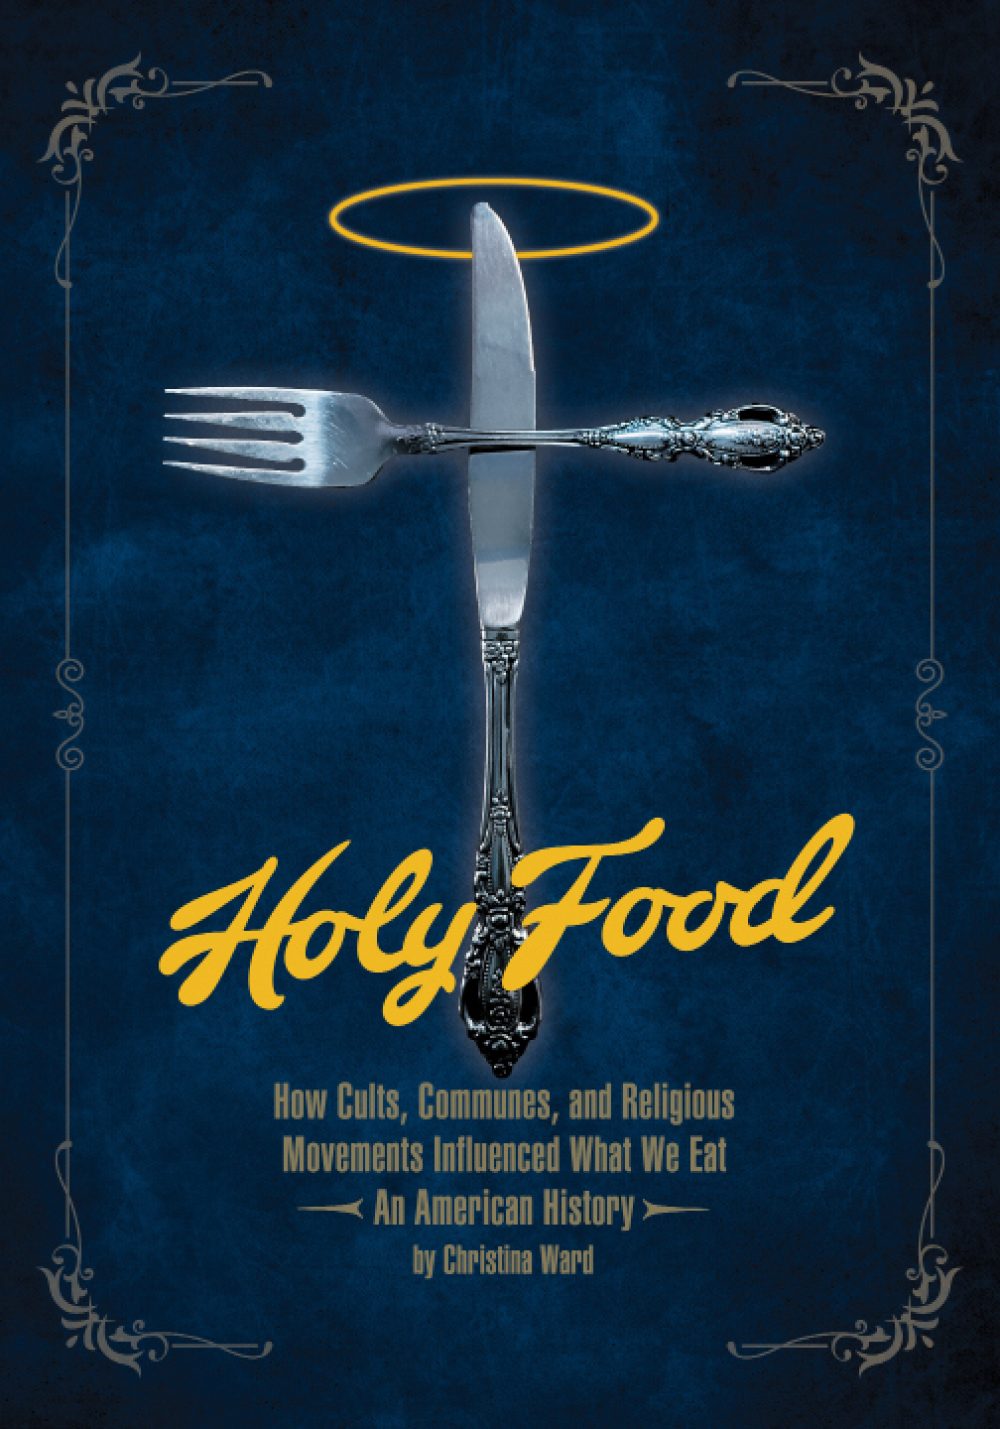 Book Review i41 Holy Food